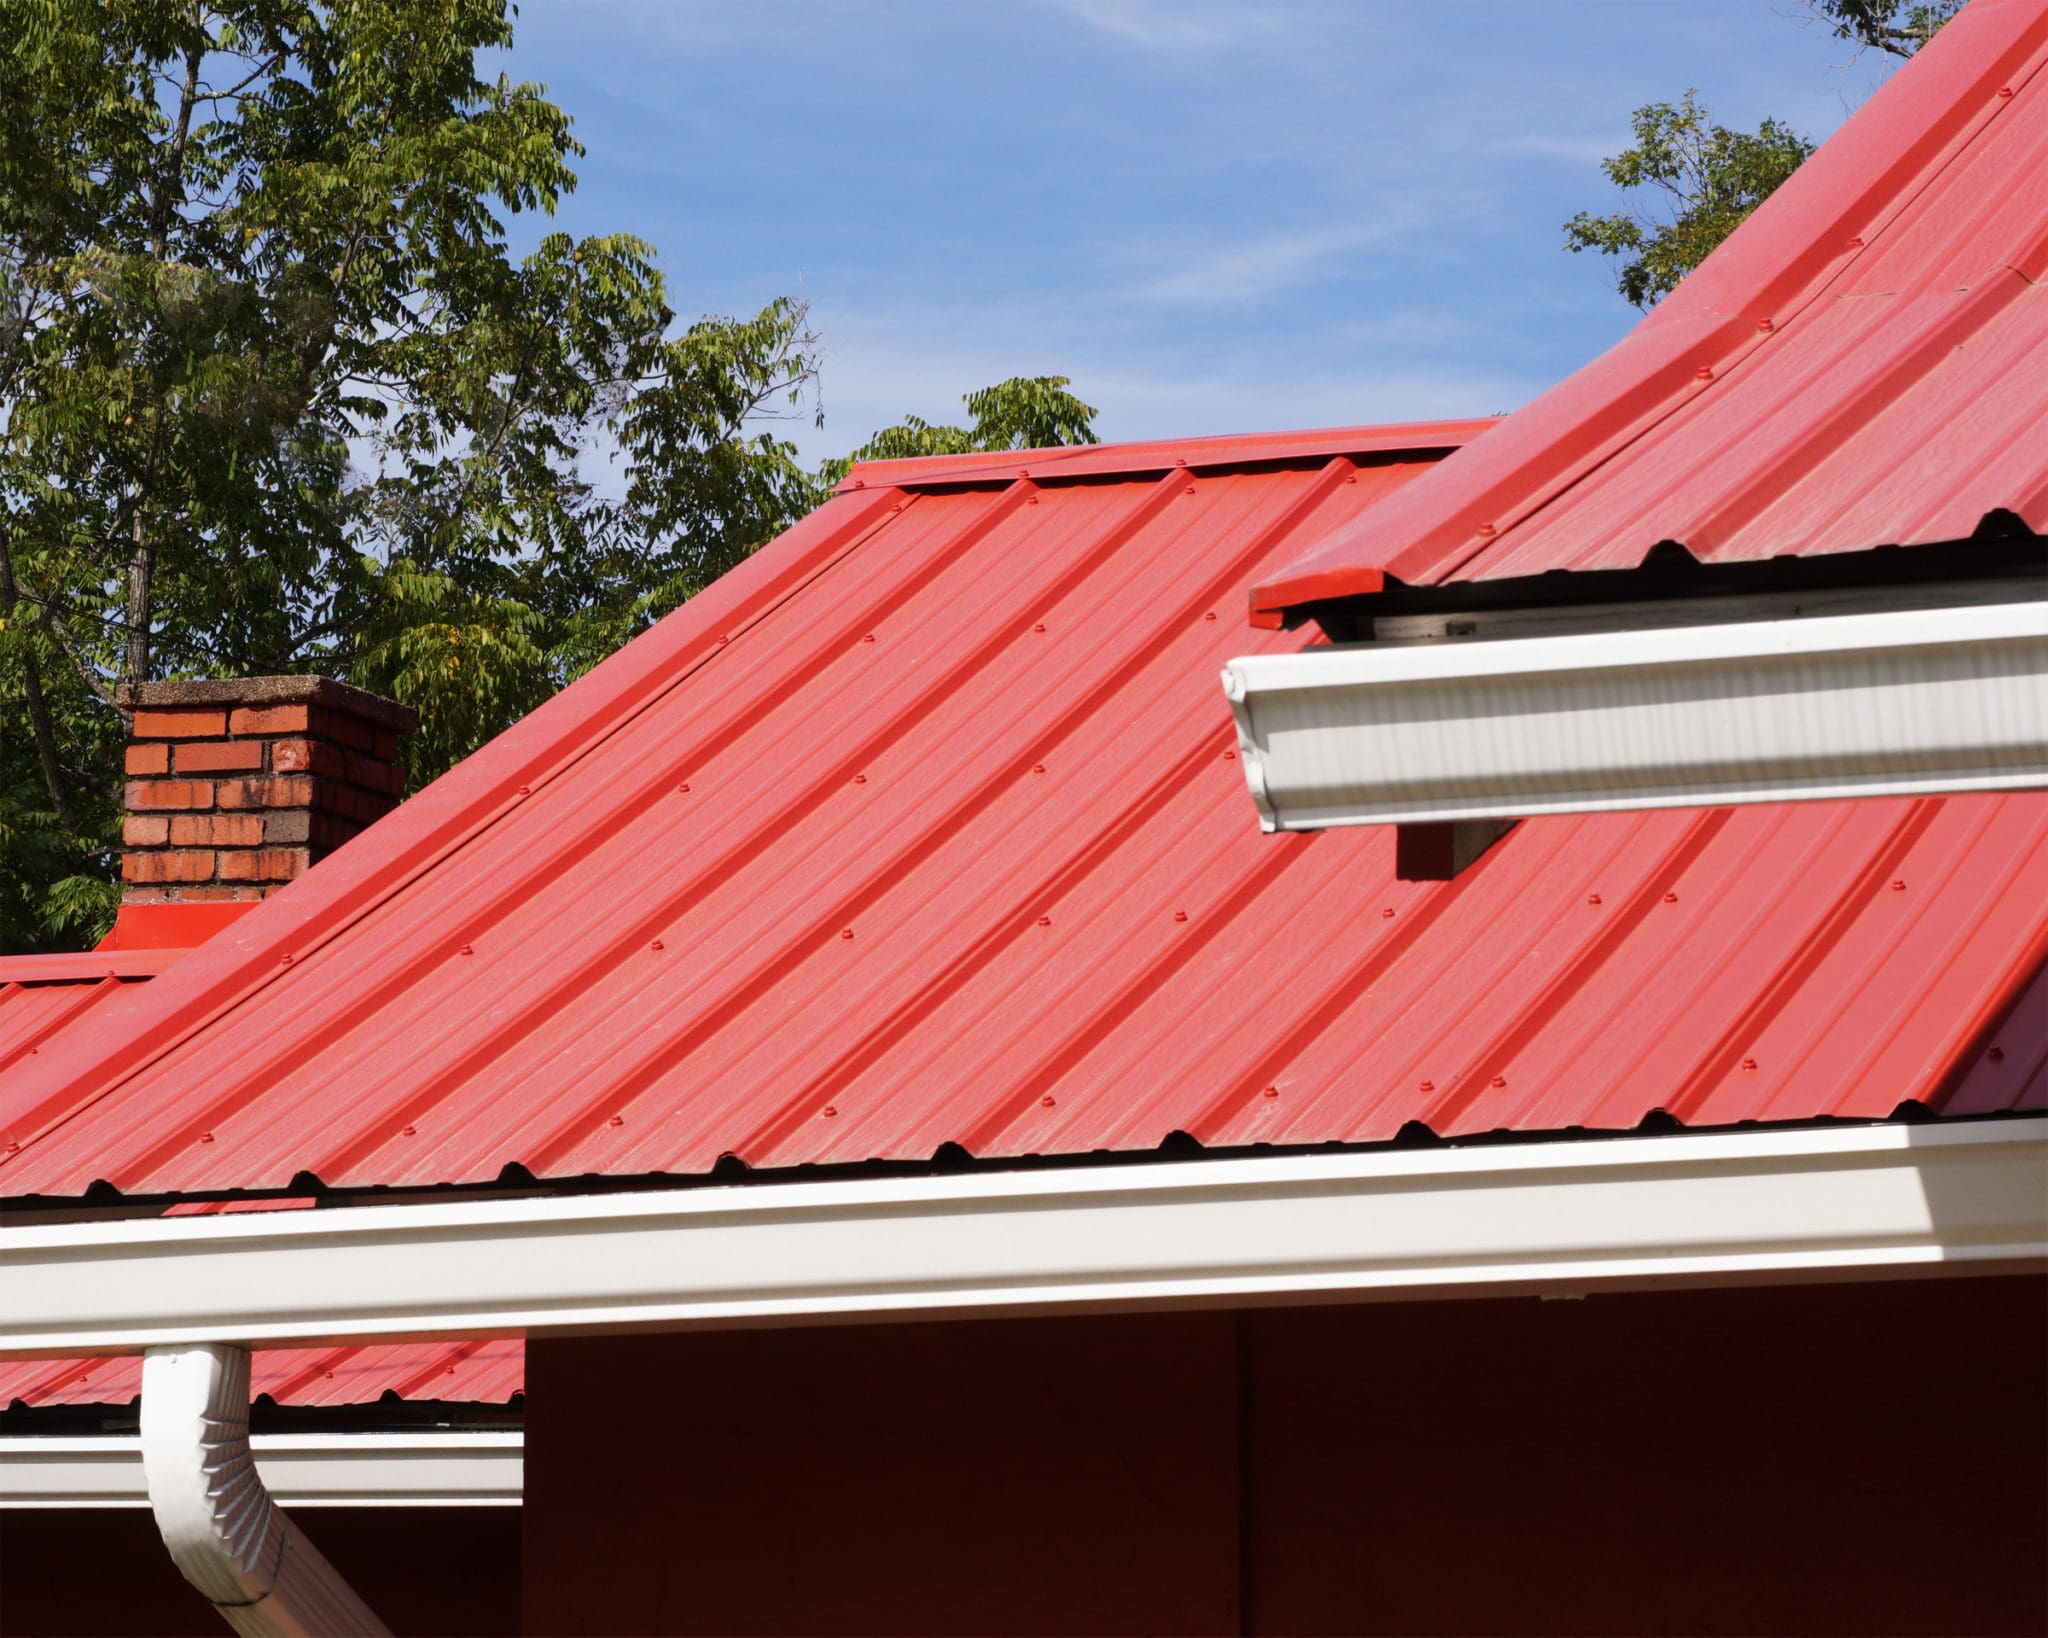 corrugated-metal-roofing-company-corrugated-metal-roof-repair